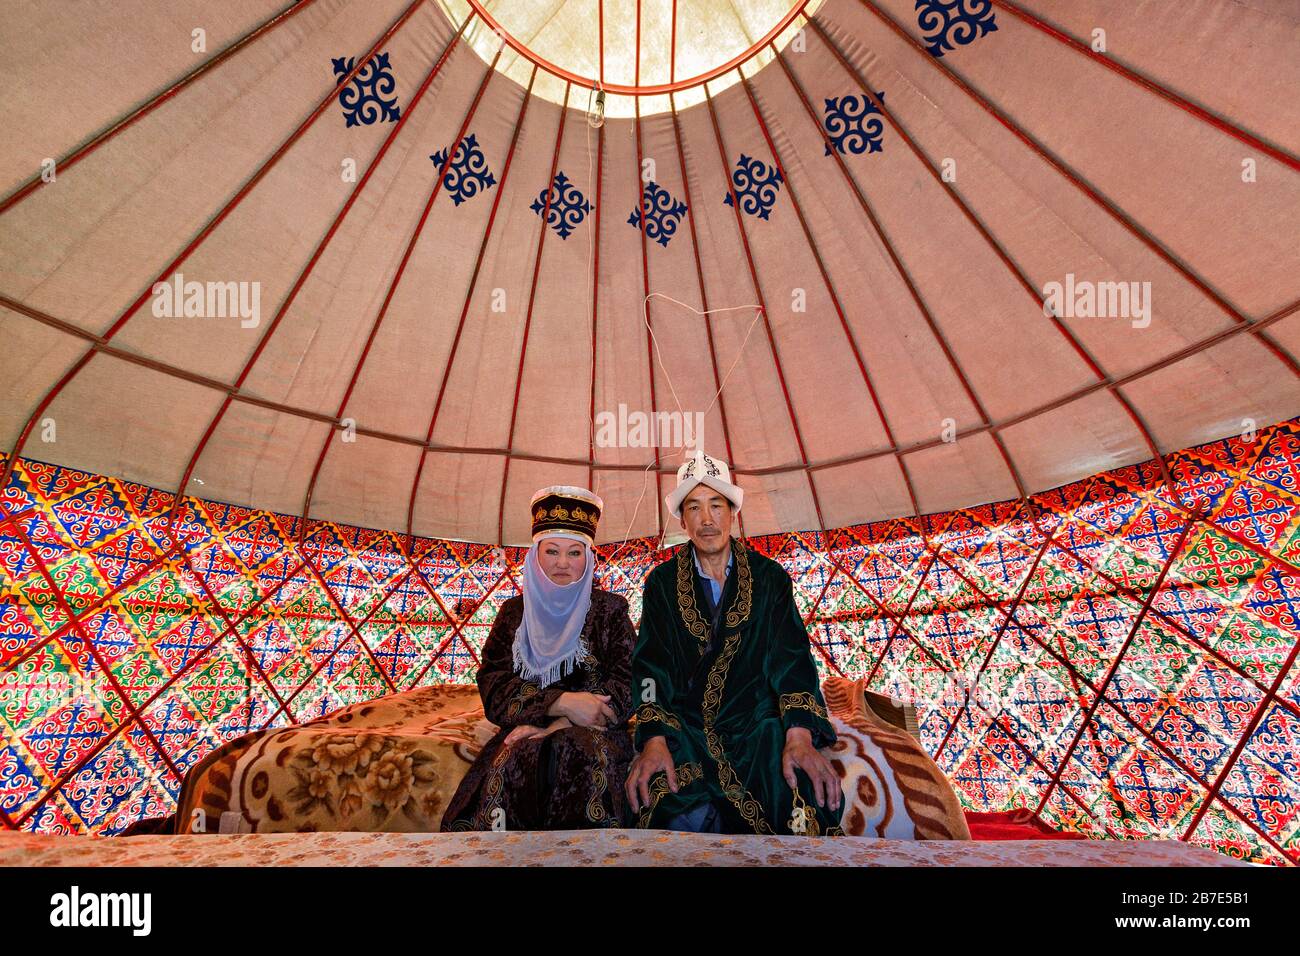 Kyrgyz couple in national costumes, in a nomadic tent known as yurt, near the city of Bishkek, Kyrgyzstan Stock Photo